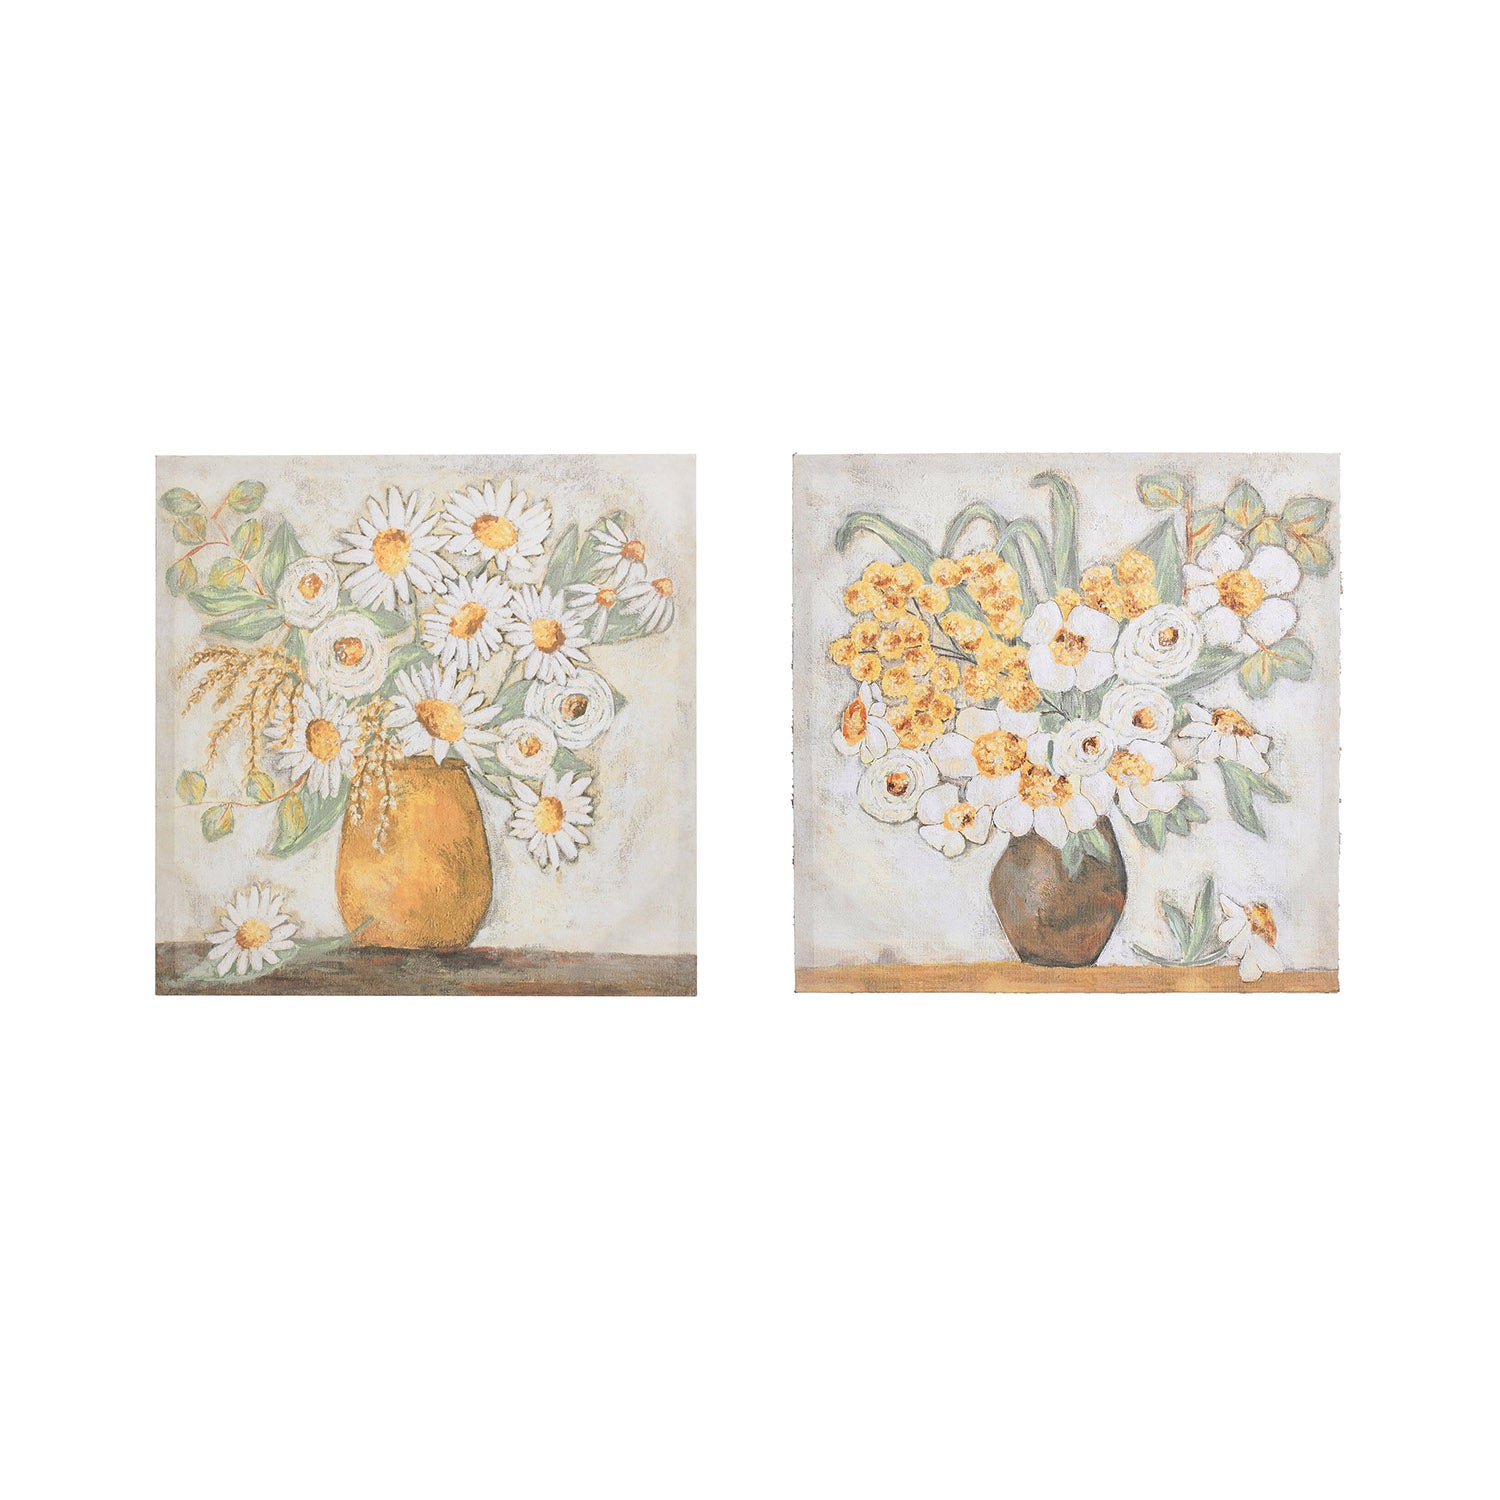 20" Square Canvas Wall Décor w/ Flowers in Vase, 2 Styles ©